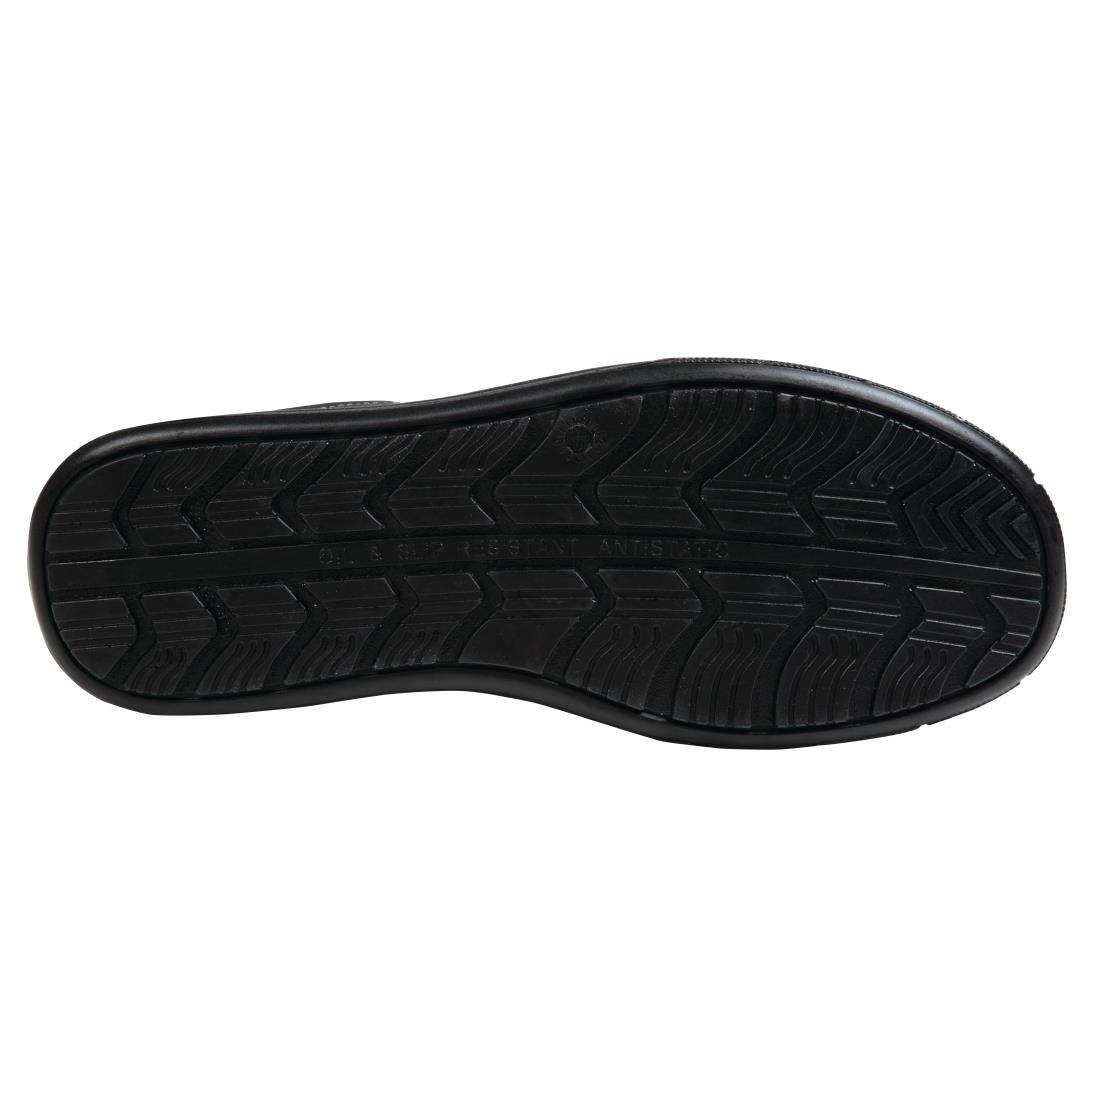 Slipbuster Safety Trainers Black 37 - BB420-37  - 2